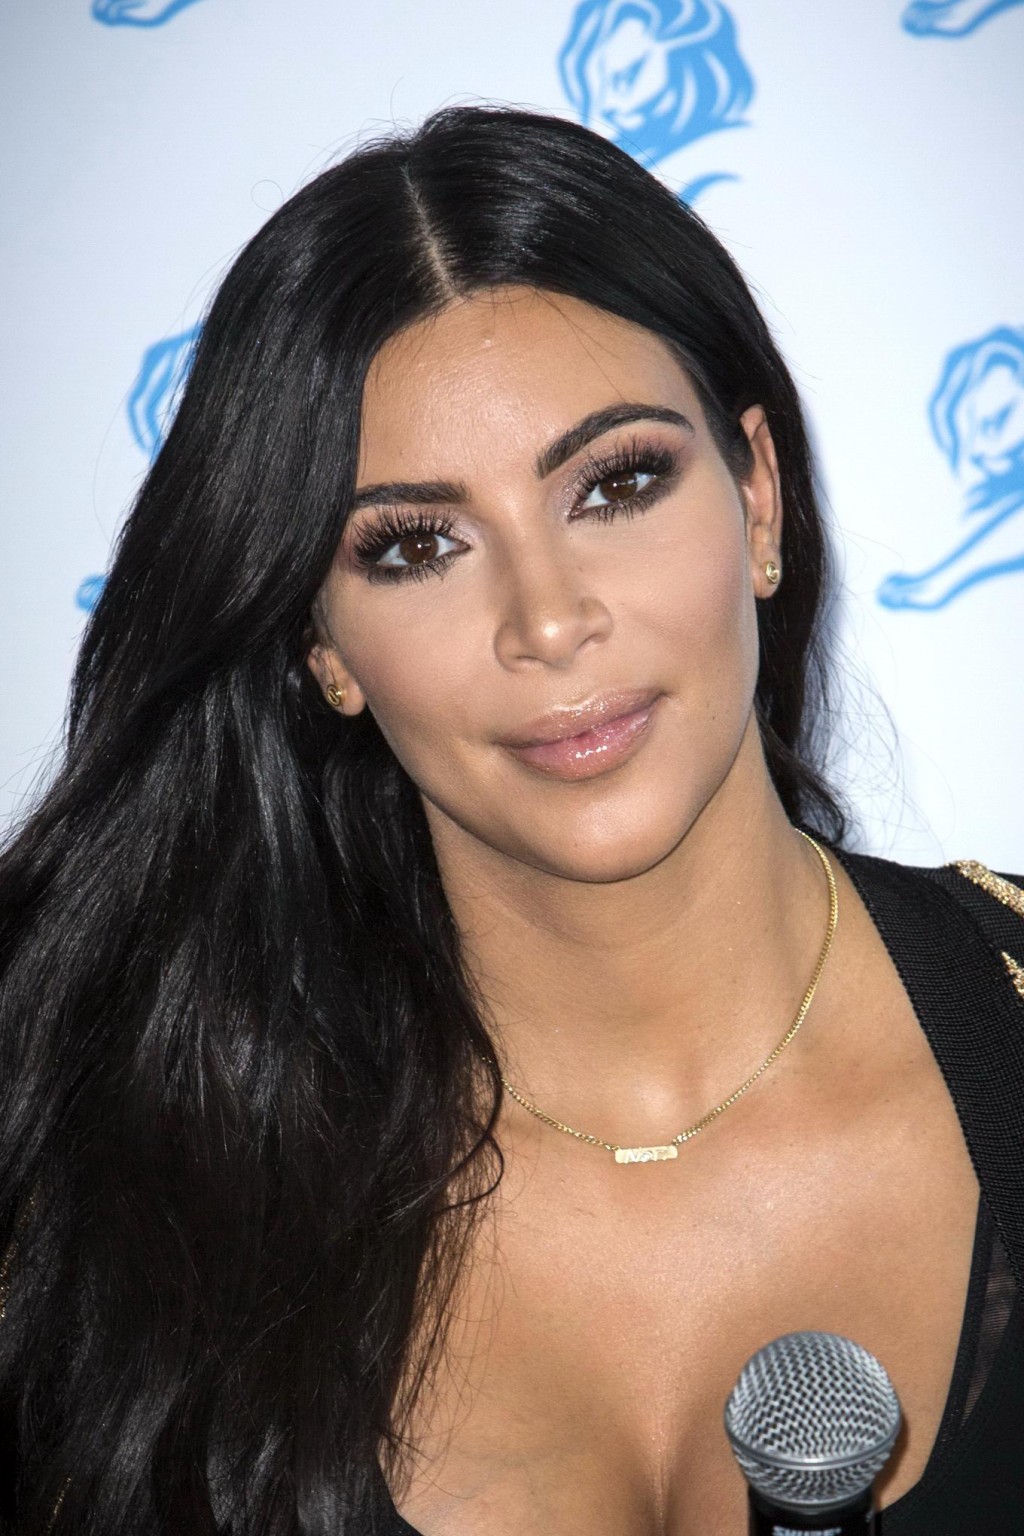 Kim Kardashian showing huge cleavage at the Cannes Lions event #75160402